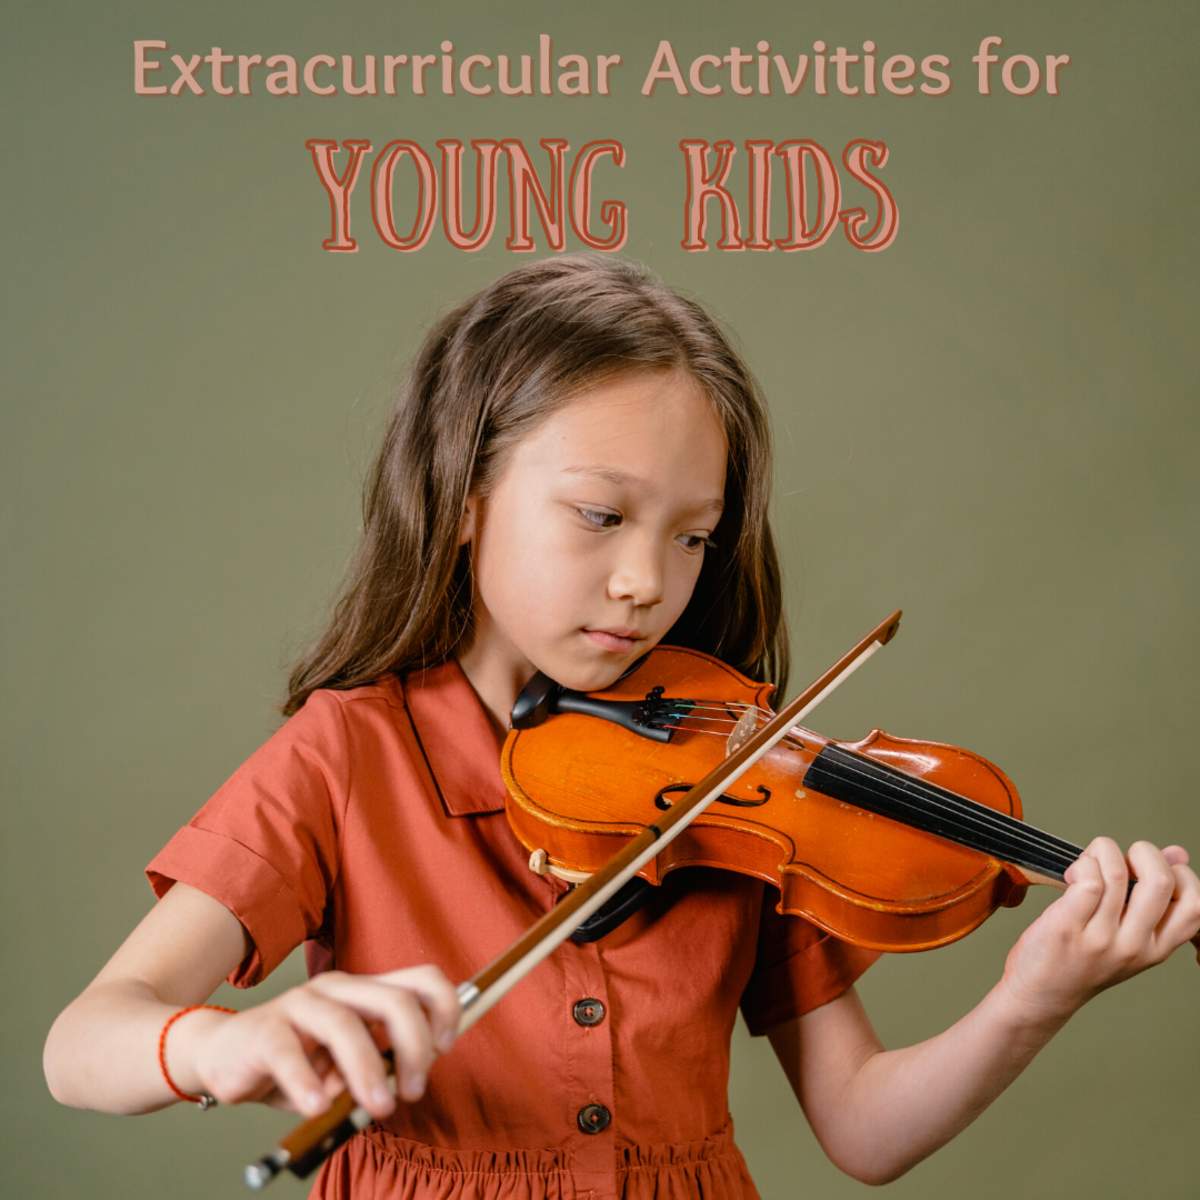 Why it's good for kids to participate in extracurricular activities and some good activities to consider